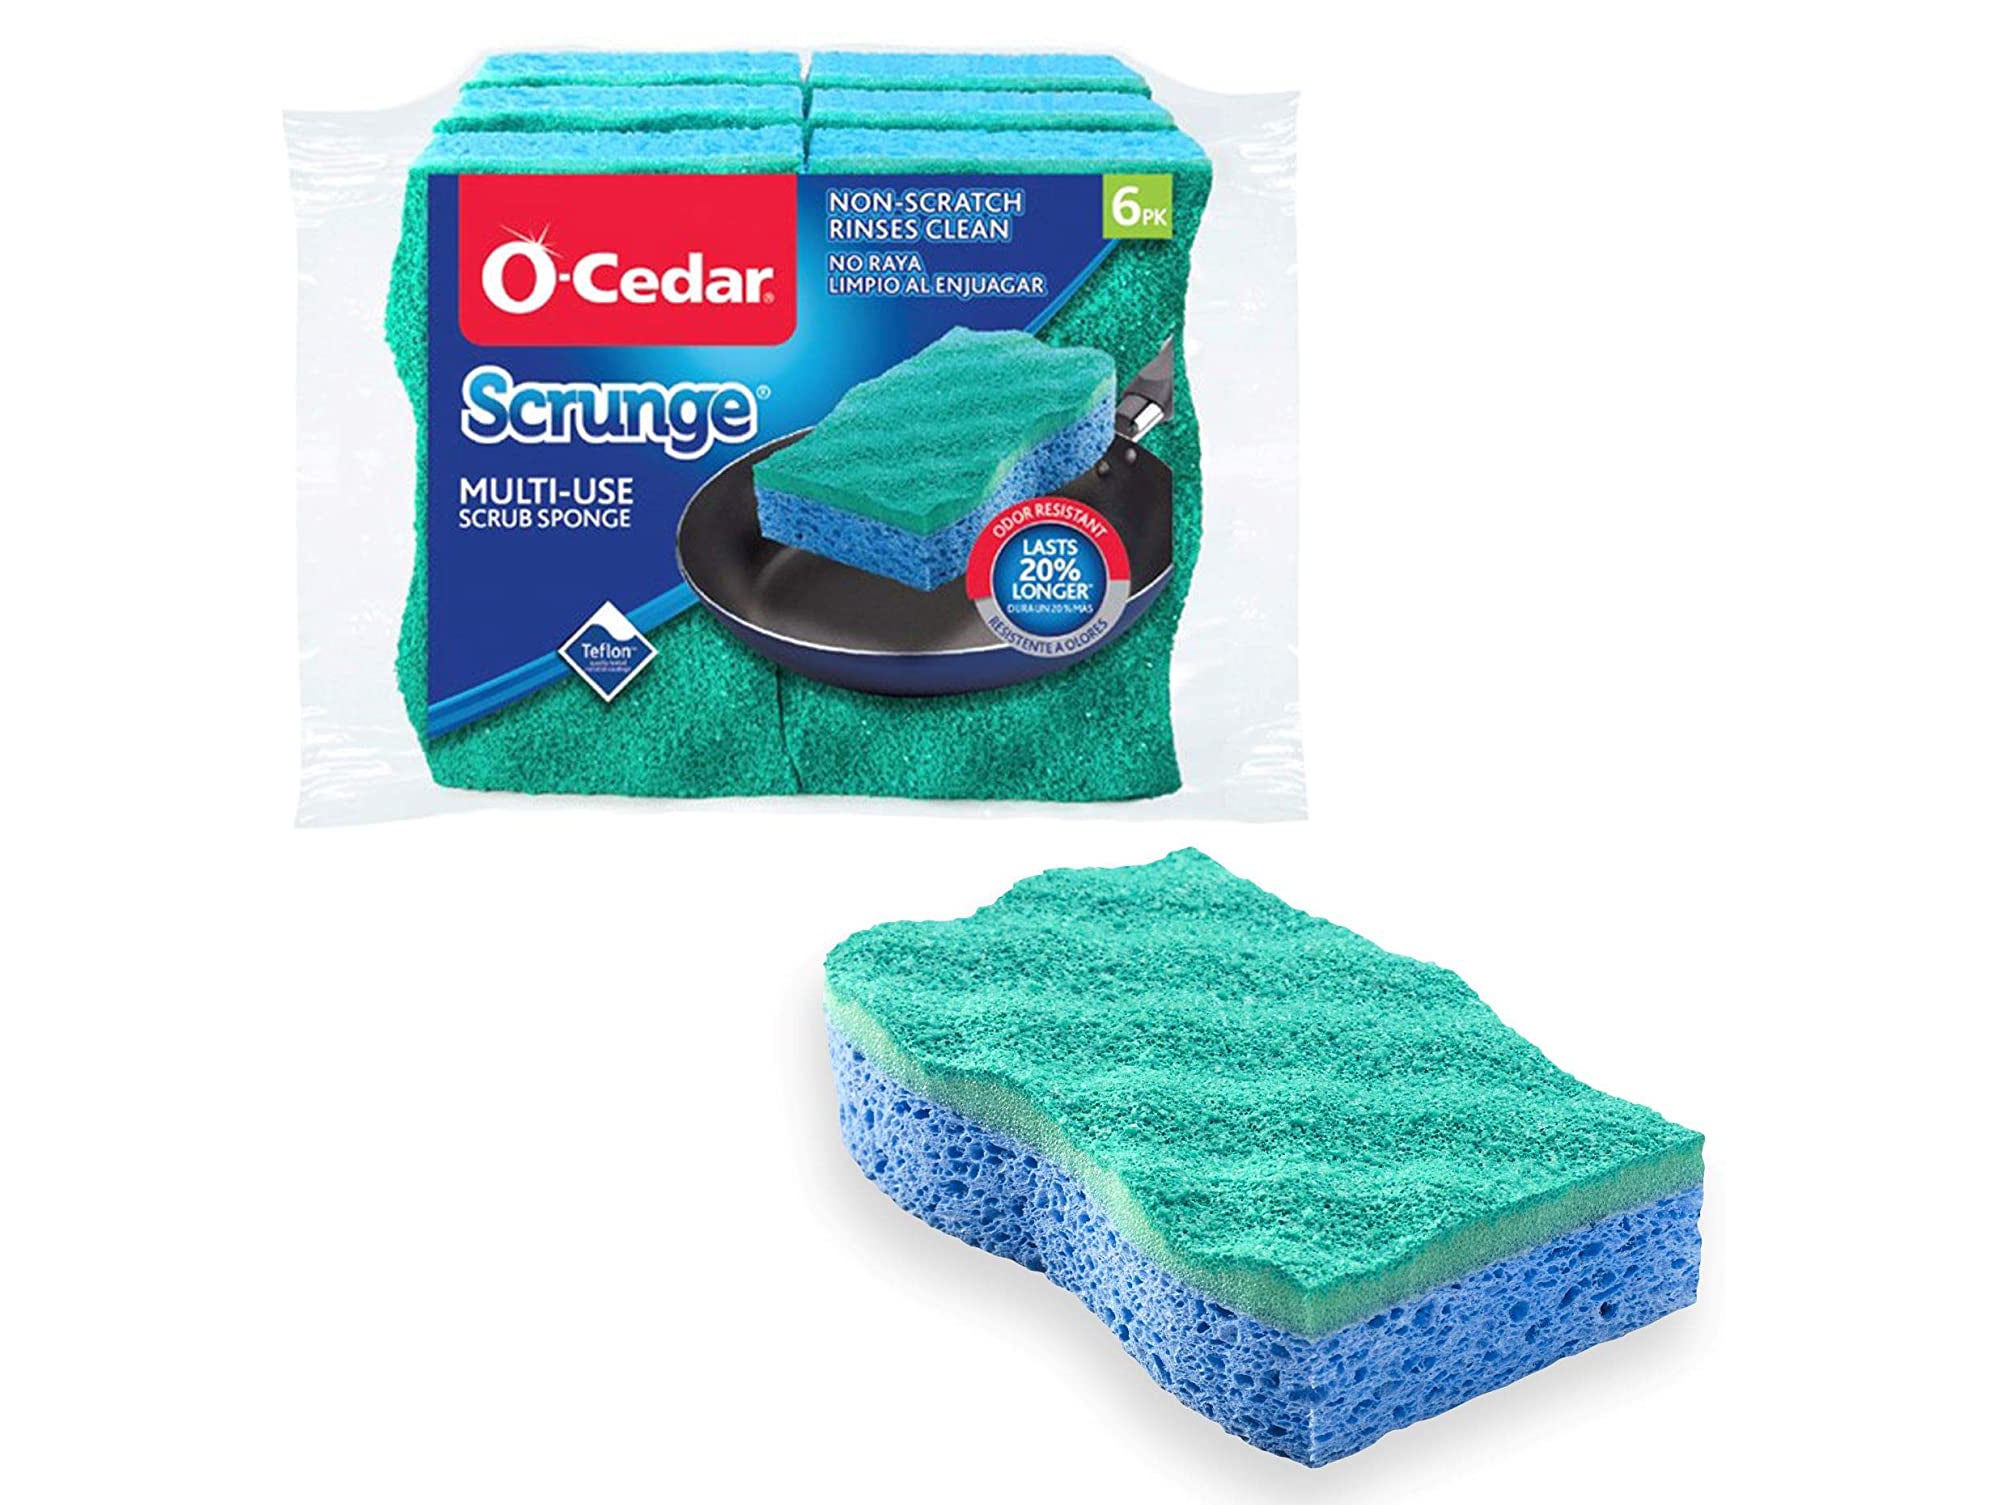 O-Cedar Scrunge Multi-Use (Pack of 6) Non-Scratch, Odor-Resistant All-Purpose Scrubbing Sponge Safely Cleans All Hard Surfaces in Kitchen and Bathroom.jpg